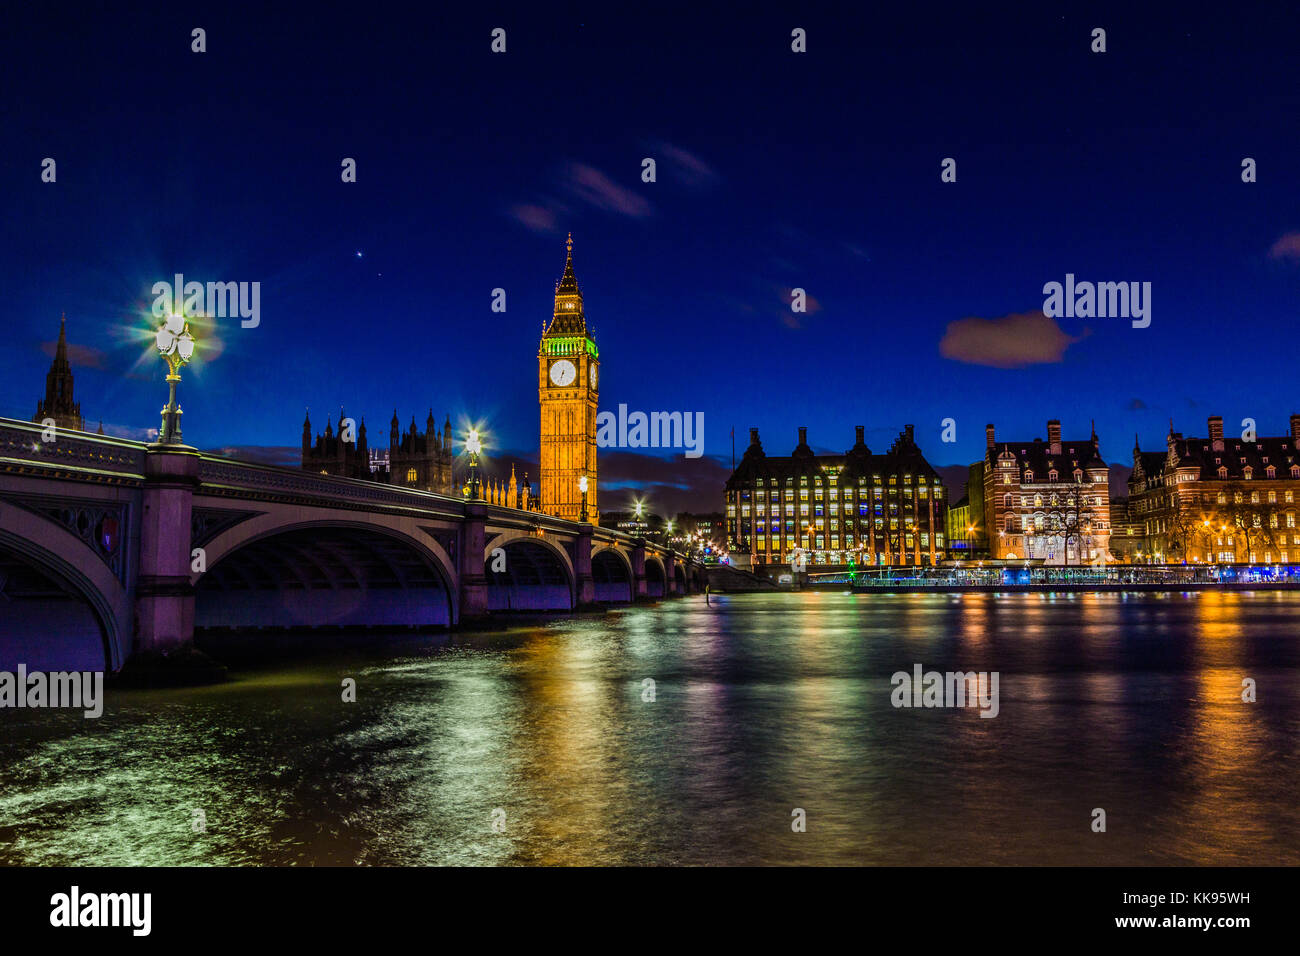 A famous landmark, Big Ben clock tower at night taken from the Southside of the Thames River in central London. Stock Photo